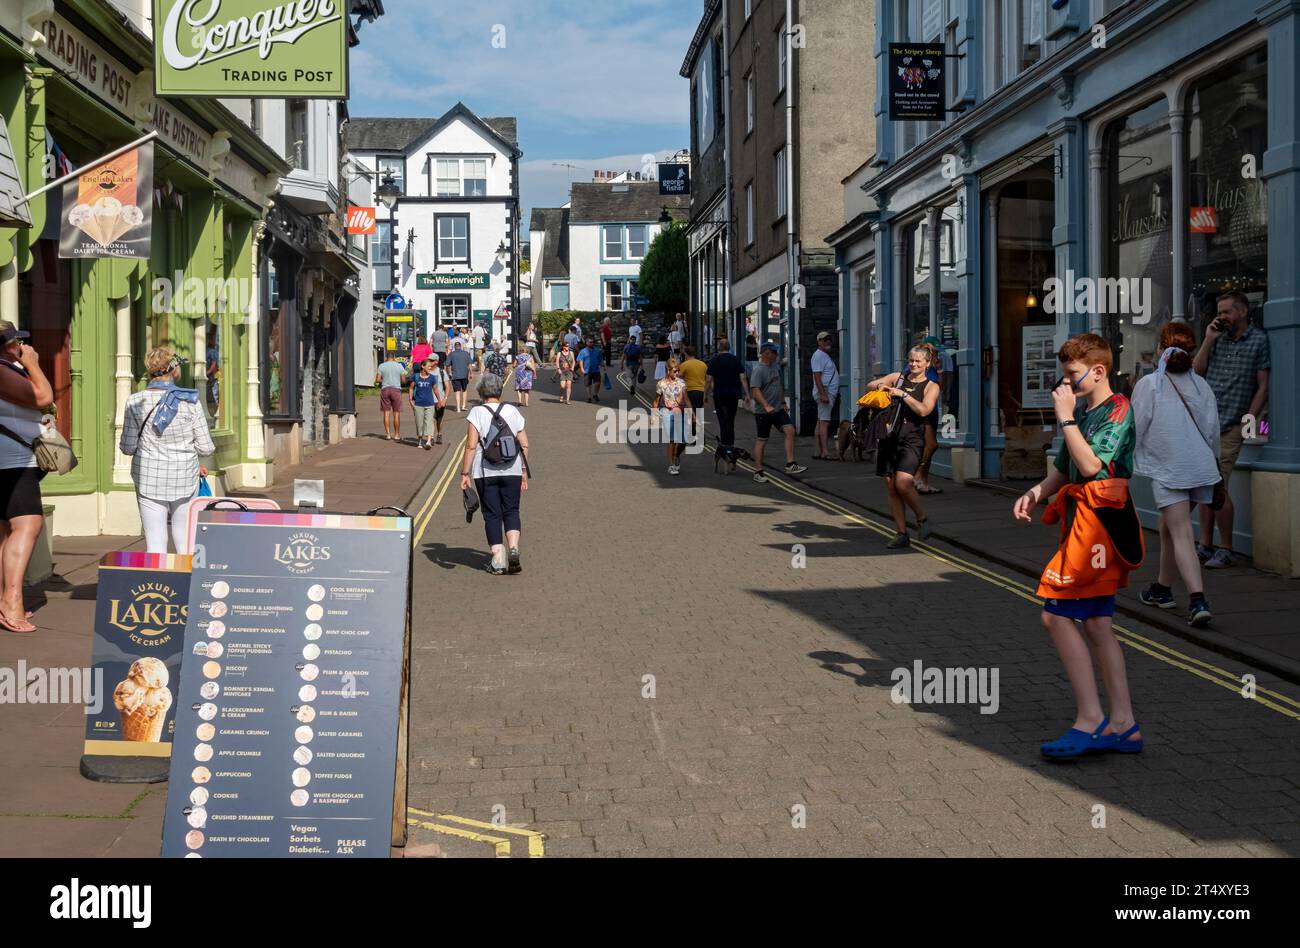 People tourists visitors walking by shops stores in the town centre street in summer Lake Road Keswick Cumbria England UK United Kingdom Britain Stock Photo